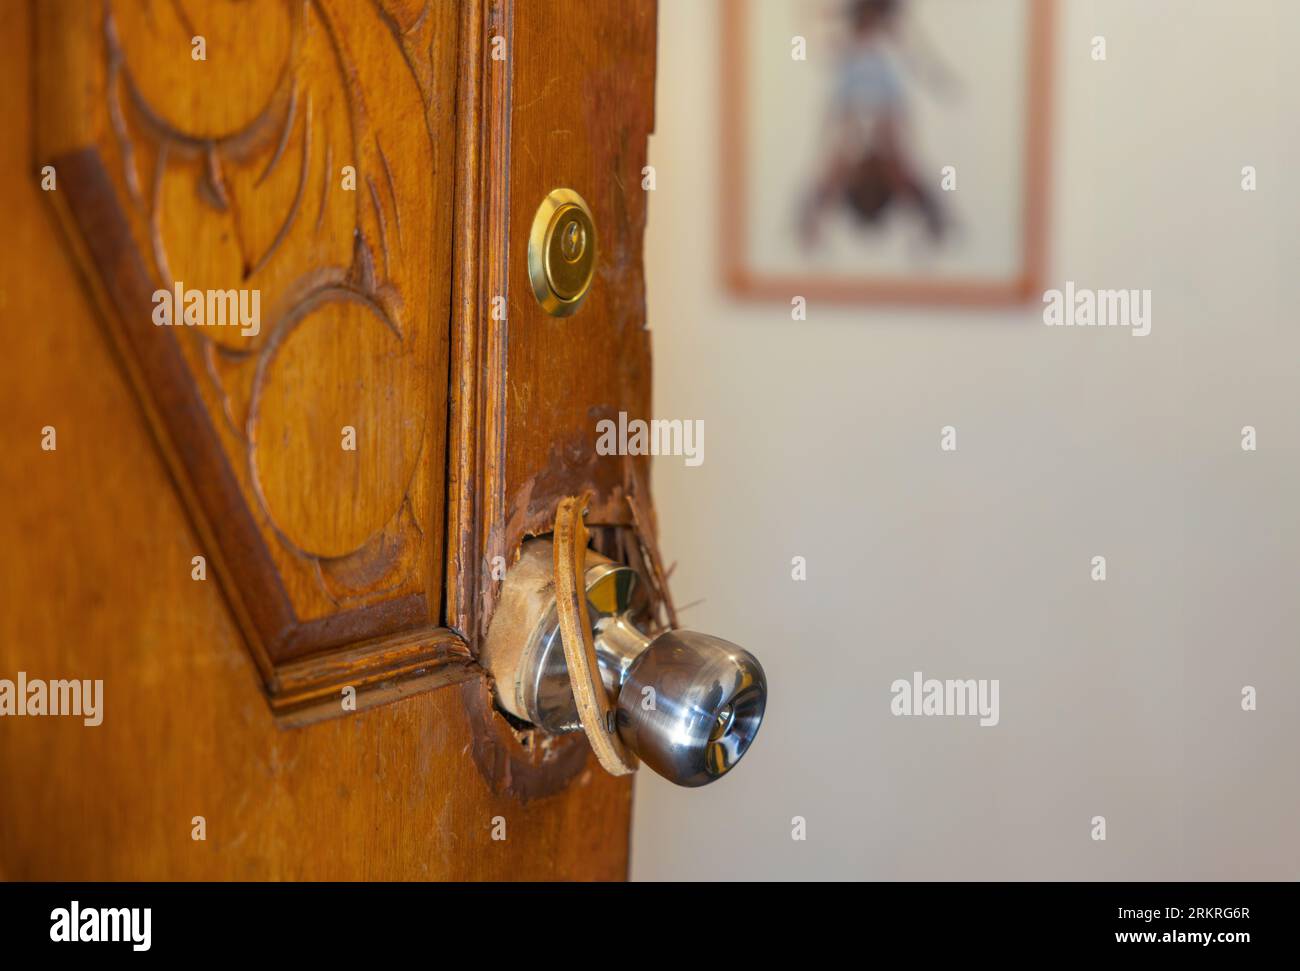 broken door lock, violent entry home invasion, robbers gained entry Stock Photo